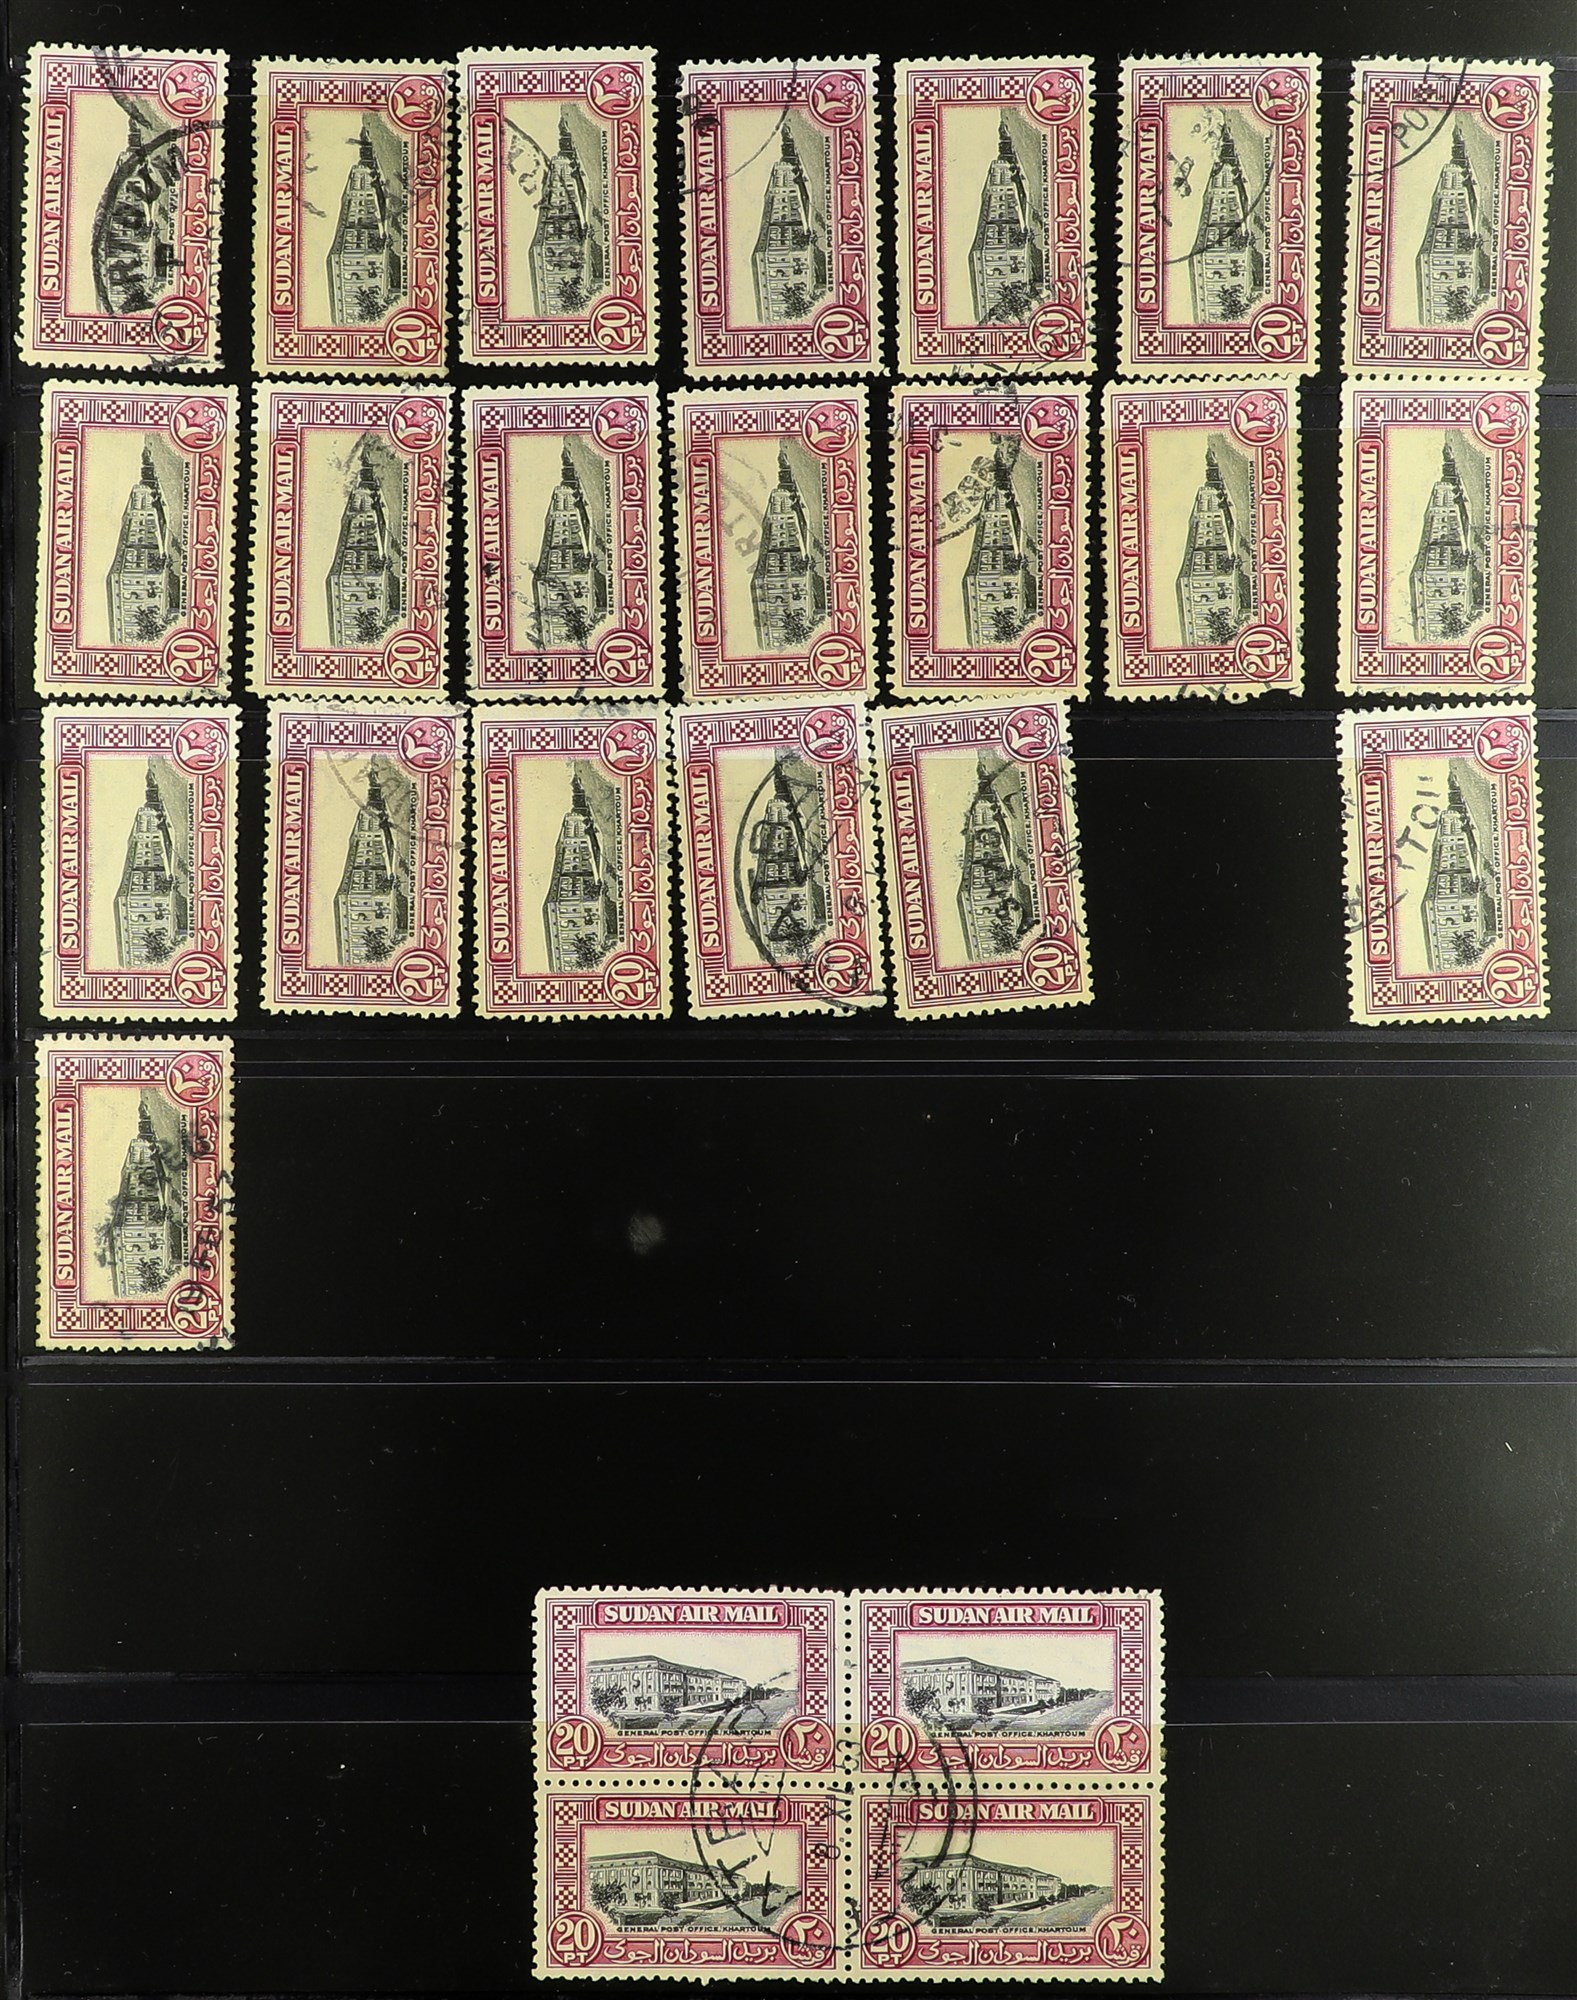 SUDAN 1898 - 1954 SPECIALISED USED RANGES IN 5 ALBUMS. Around 12,000 used stamps with many - Image 36 of 41